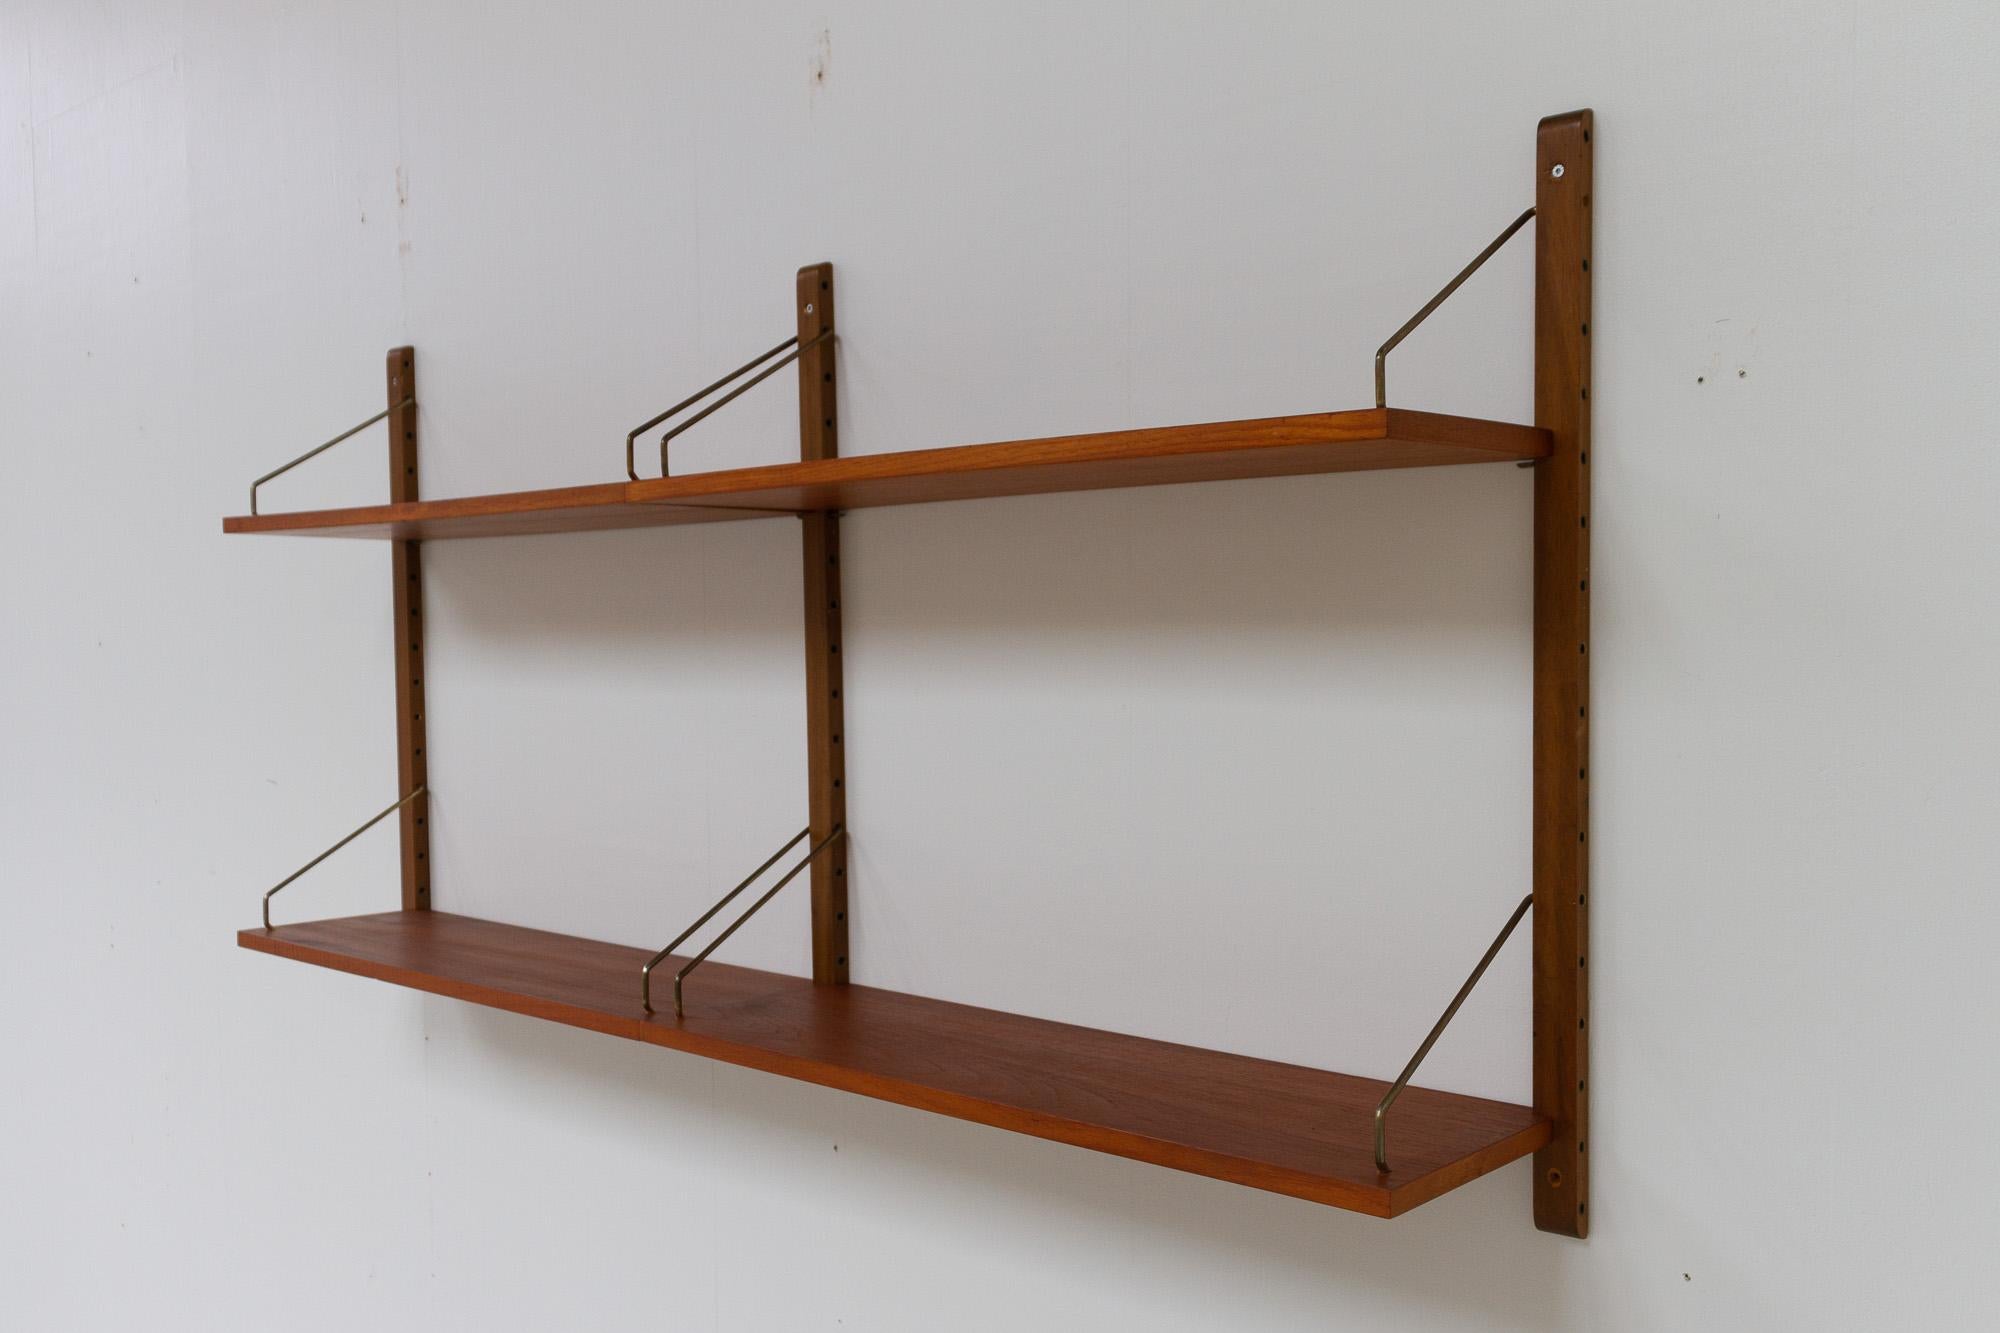 Vintage Danish Floating Teak Shelves by Poul Cadovius for Cado Royal, 1960s.
Small wall unit with four shelves, three uprights and brass fittings.
Designed and manufactured by Poul Cadovius System Royal, Cado.
Stamped Made in Denmark on the back.